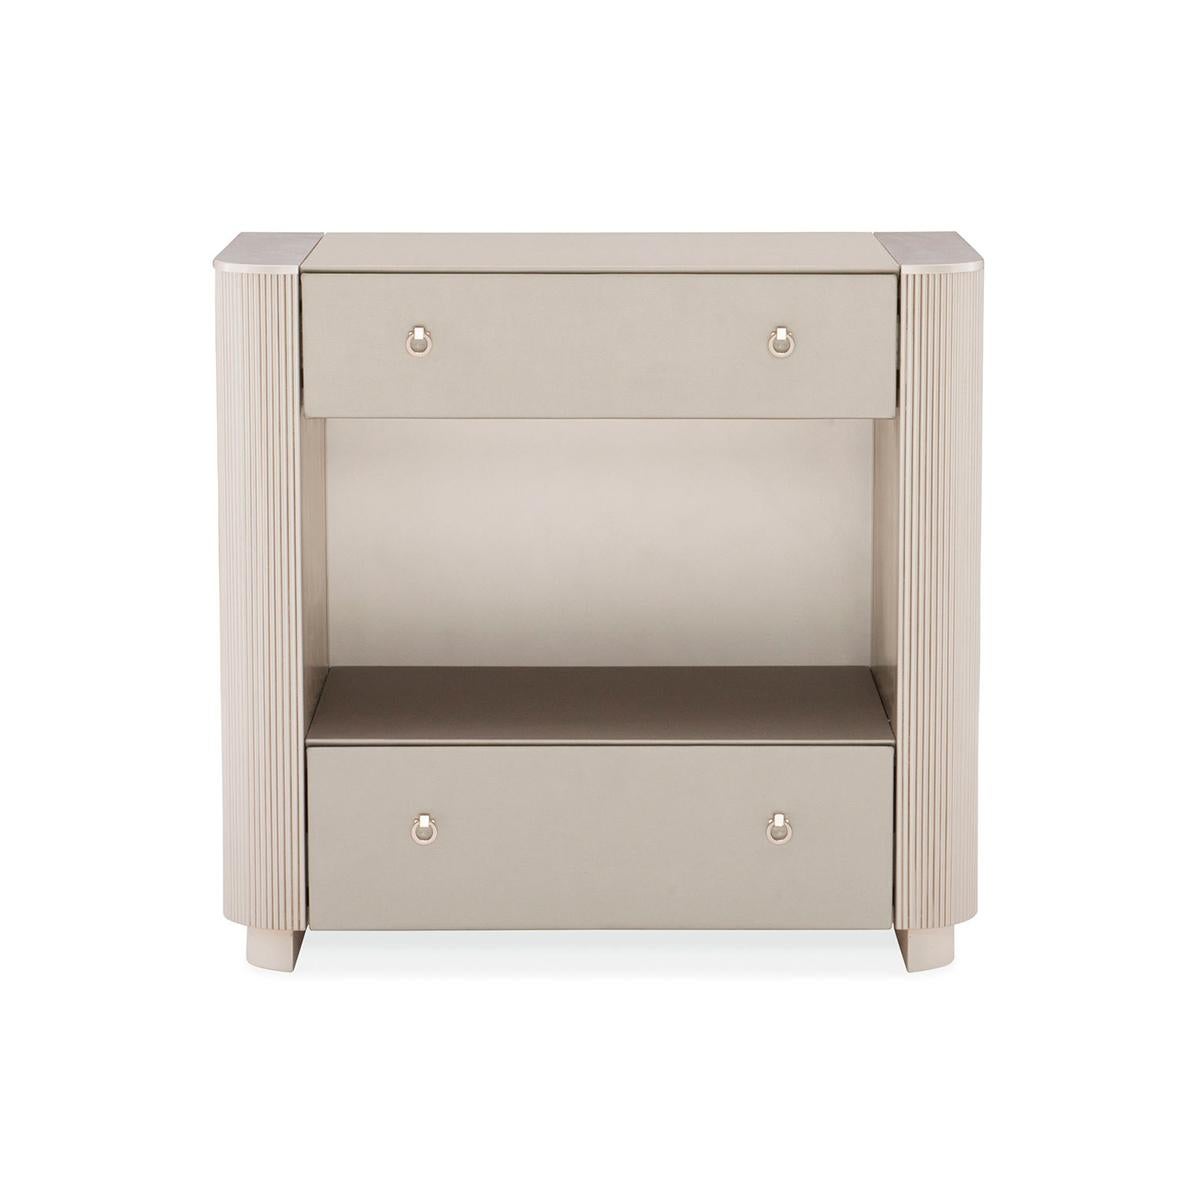 Cap the sides of your favorite bed with elegant nightstands that are just as dreamy. This stunning bedside piece boasts a fashion-forward design with a softly rounded profile accentuated by exquisite fluted sides and vinyl wrapped drawer